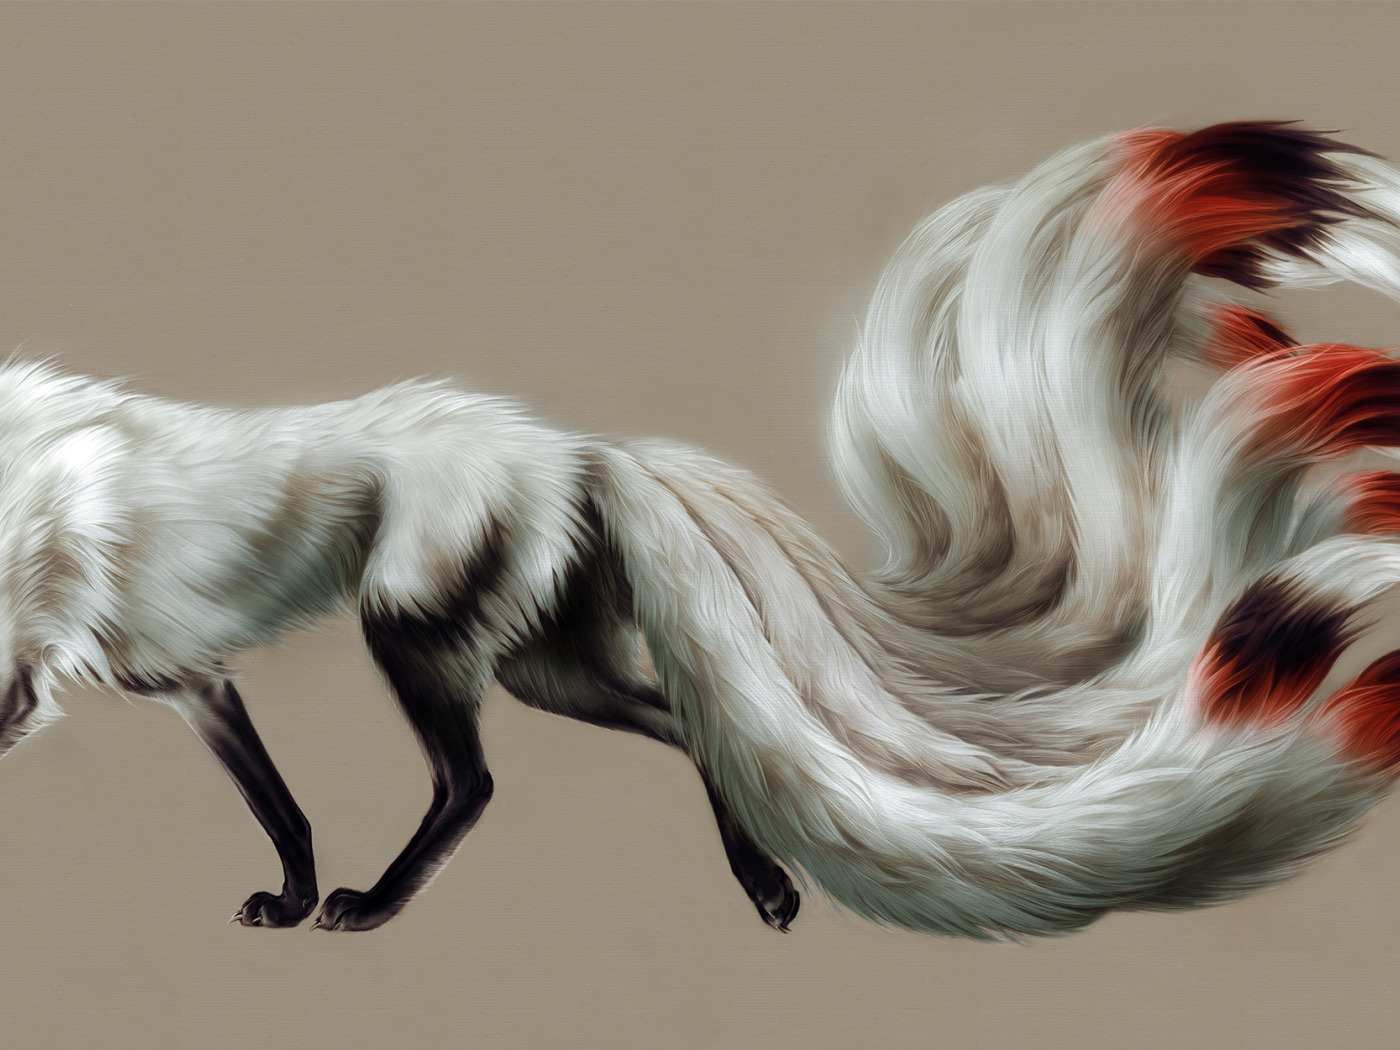 Download wallpaper Fox, nine-tailed, by toedeledoki, section art in resolut...